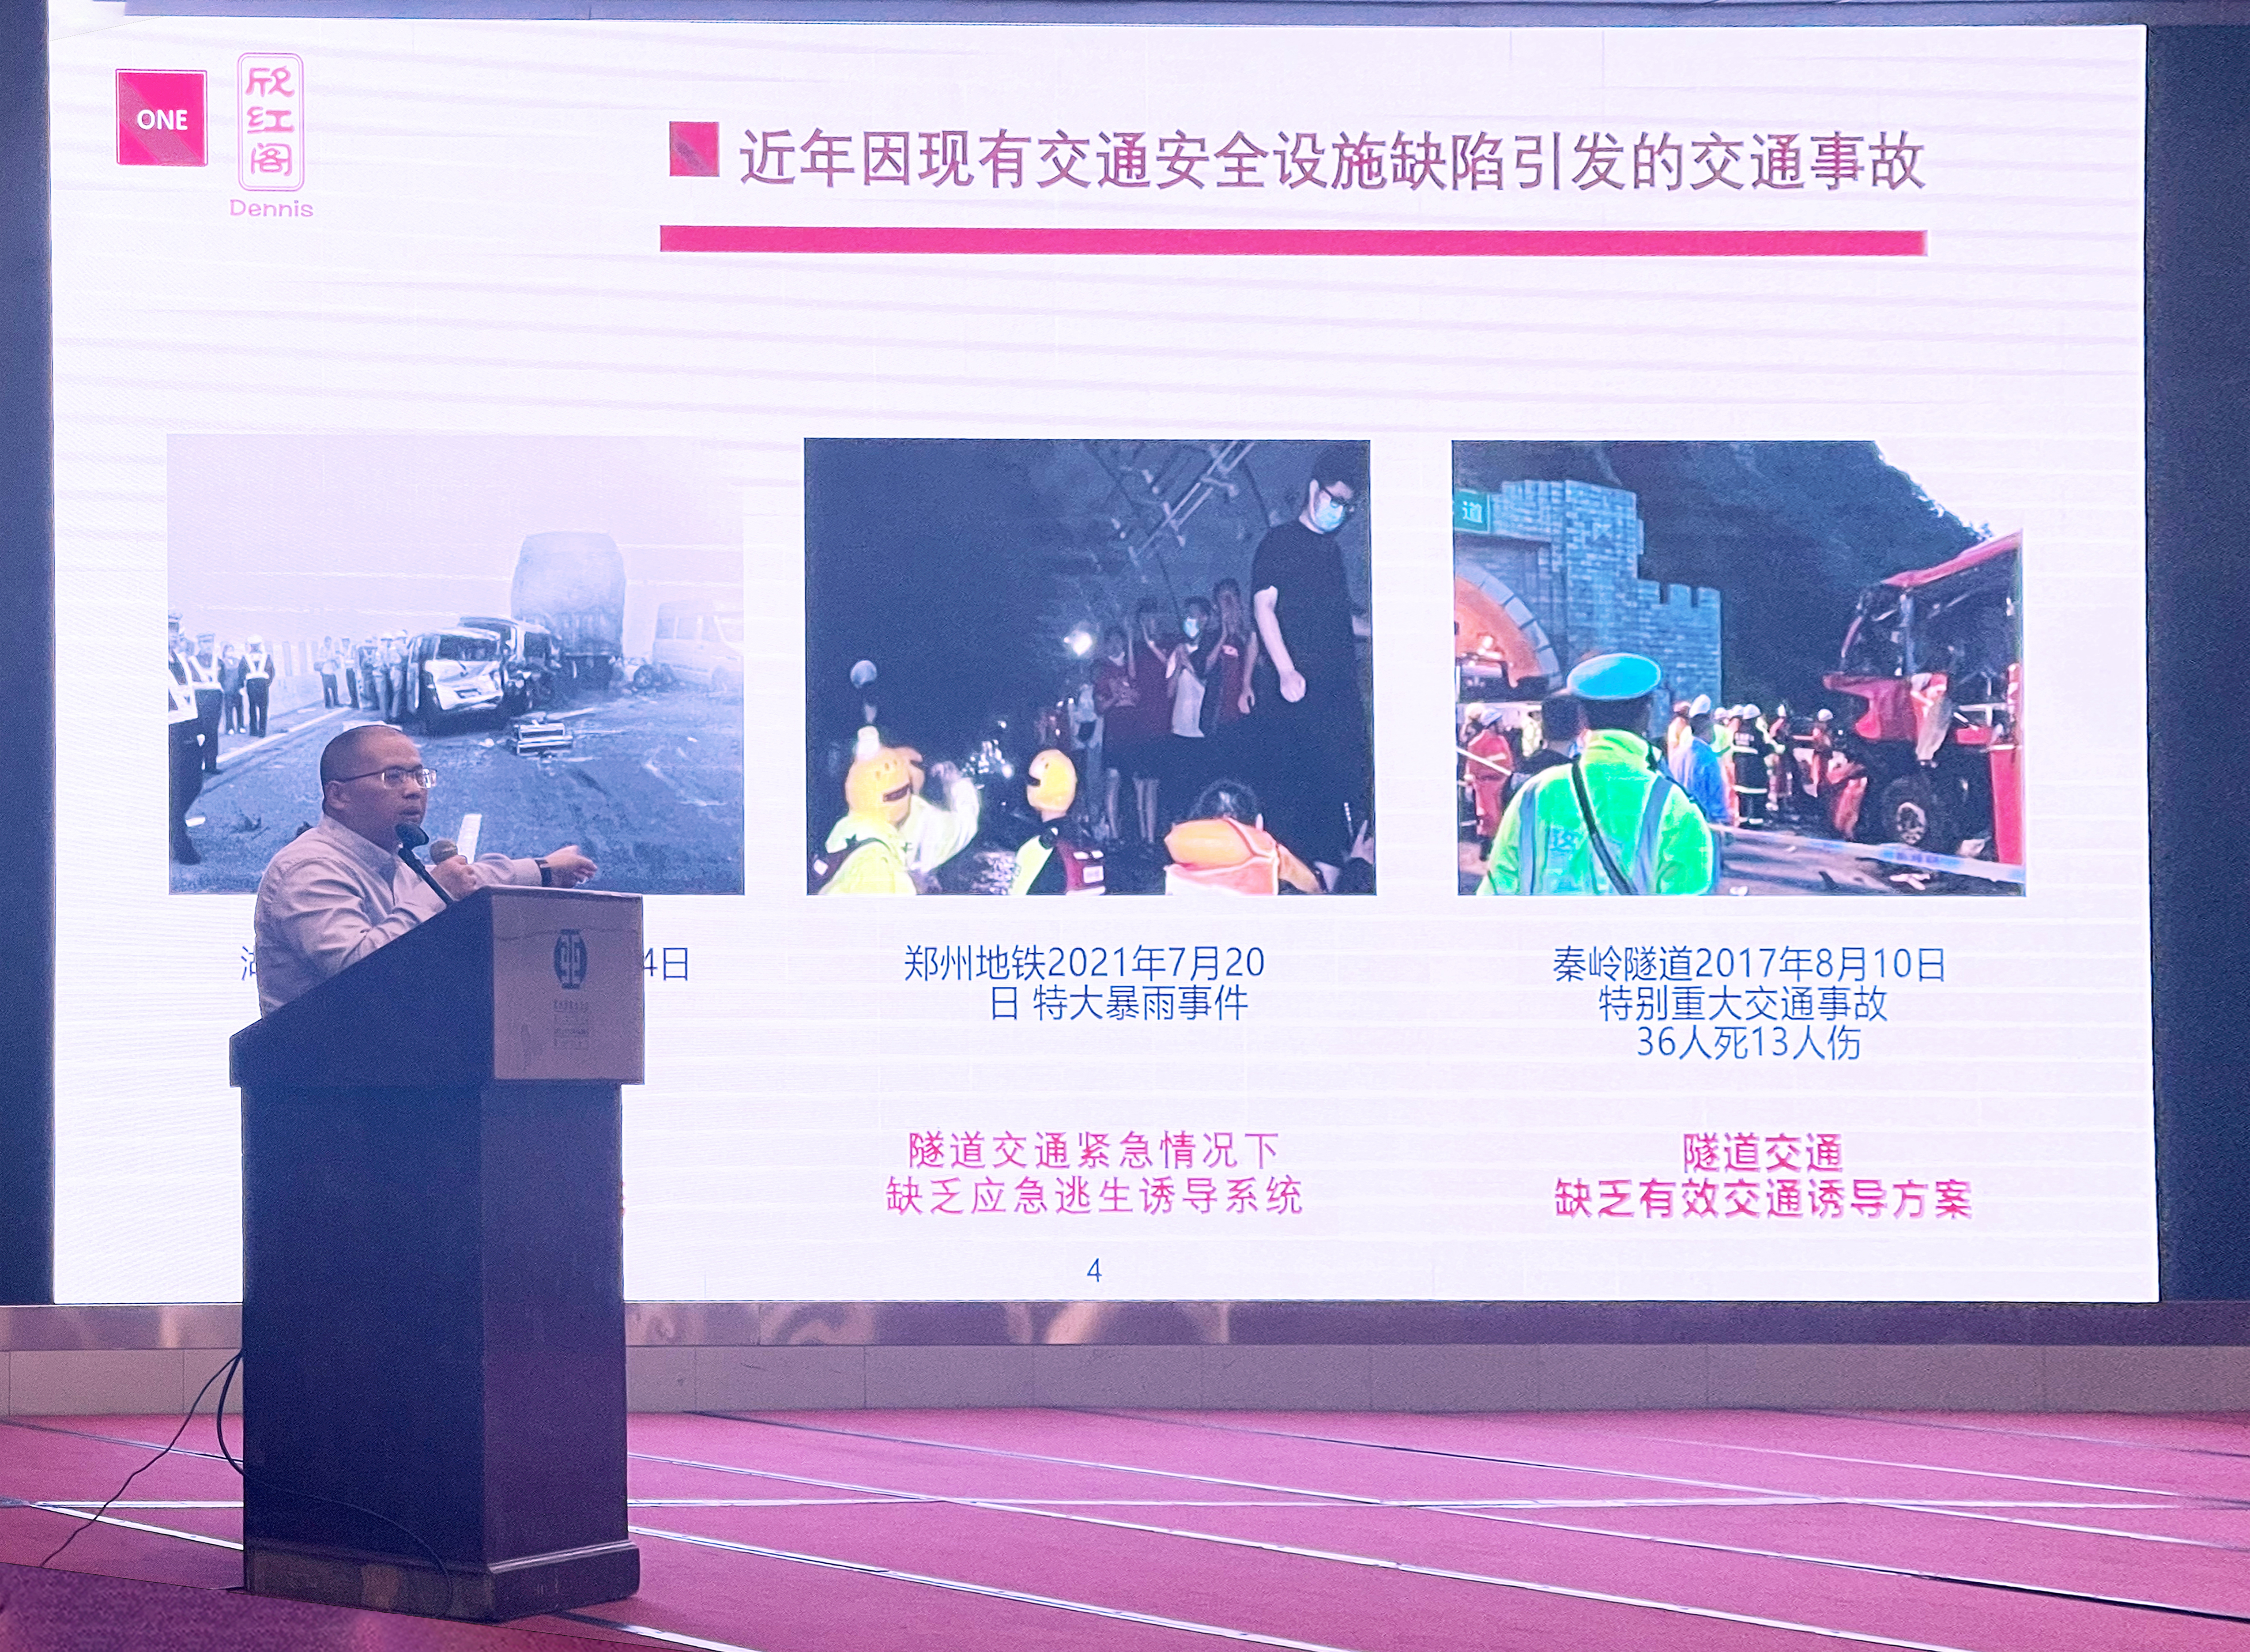 Zhejiang Minhui Shares Rare Earth Photoluminescent Materials and Zero Carbon Photoluminescence Technology at Guangdong Highway Society Traffic Engineering and Technology Exchange Conference